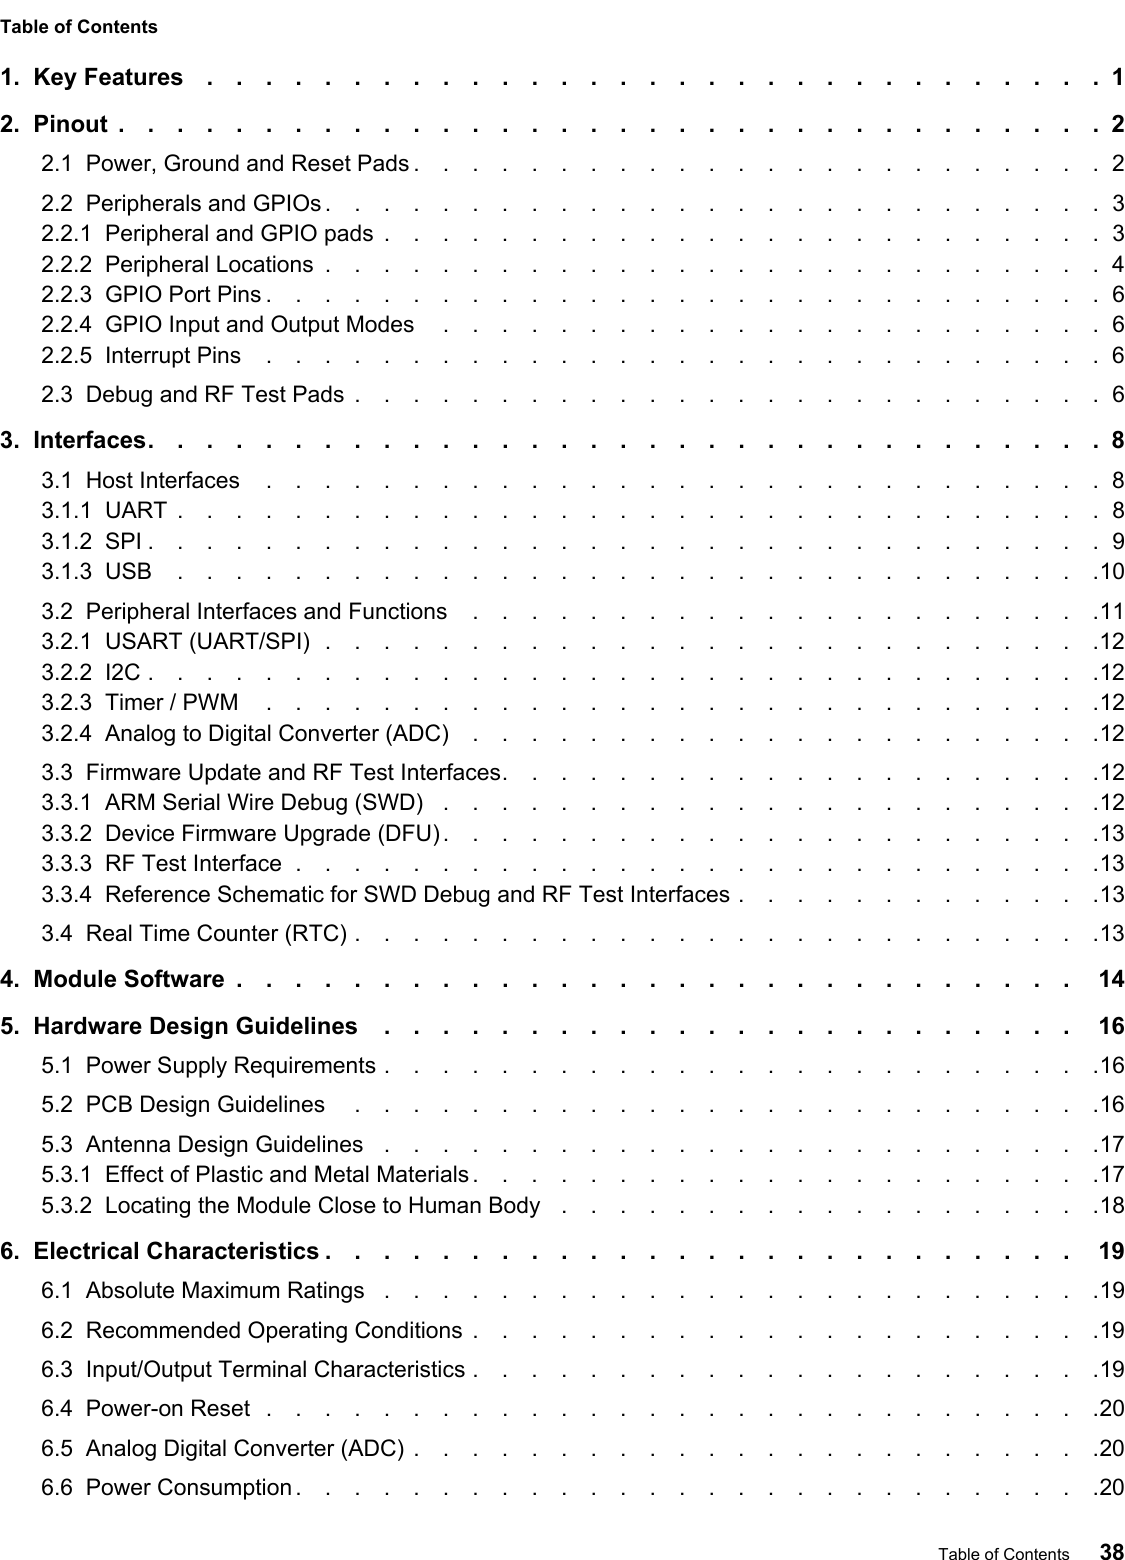 Table of Contents1.  Key Features ...............................12.  Pinout ..................................22.1  Power, Ground and Reset Pads ........................22.2  Peripherals and GPIOs ...........................32.2.1  Peripheral and GPIO pads .........................32.2.2  Peripheral Locations ...........................42.2.3  GPIO Port Pins .............................62.2.4  GPIO Input and Output Modes .......................62.2.5  Interrupt Pins .............................62.3  Debug and RF Test Pads ..........................63.  Interfaces.................................83.1  Host Interfaces .............................83.1.1  UART ................................83.1.2  SPI .................................93.1.3  USB ................................103.2  Peripheral Interfaces and Functions ......................113.2.1  USART (UART/SPI) ...........................123.2.2  I2C .................................123.2.3  Timer / PWM .............................123.2.4  Analog to Digital Converter (ADC) ......................123.3  Firmware Update and RF Test Interfaces.....................123.3.1  ARM Serial Wire Debug (SWD) .......................123.3.2  Device Firmware Upgrade (DFU) .......................133.3.3  RF Test Interface ............................133.3.4  Reference Schematic for SWD Debug and RF Test Interfaces .............133.4  Real Time Counter (RTC) ..........................134.  Module Software ............................. 145.  Hardware Design Guidelines ........................ 165.1  Power Supply Requirements .........................165.2  PCB Design Guidelines ..........................165.3  Antenna Design Guidelines .........................175.3.1  Effect of Plastic and Metal Materials ......................175.3.2  Locating the Module Close to Human Body  ...................186.  Electrical Characteristics .......................... 196.1  Absolute Maximum Ratings .........................196.2  Recommended Operating Conditions ......................196.3  Input/Output Terminal Characteristics ......................196.4  Power-on Reset .............................206.5  Analog Digital Converter (ADC) ........................206.6  Power Consumption ............................20Table of Contents 38